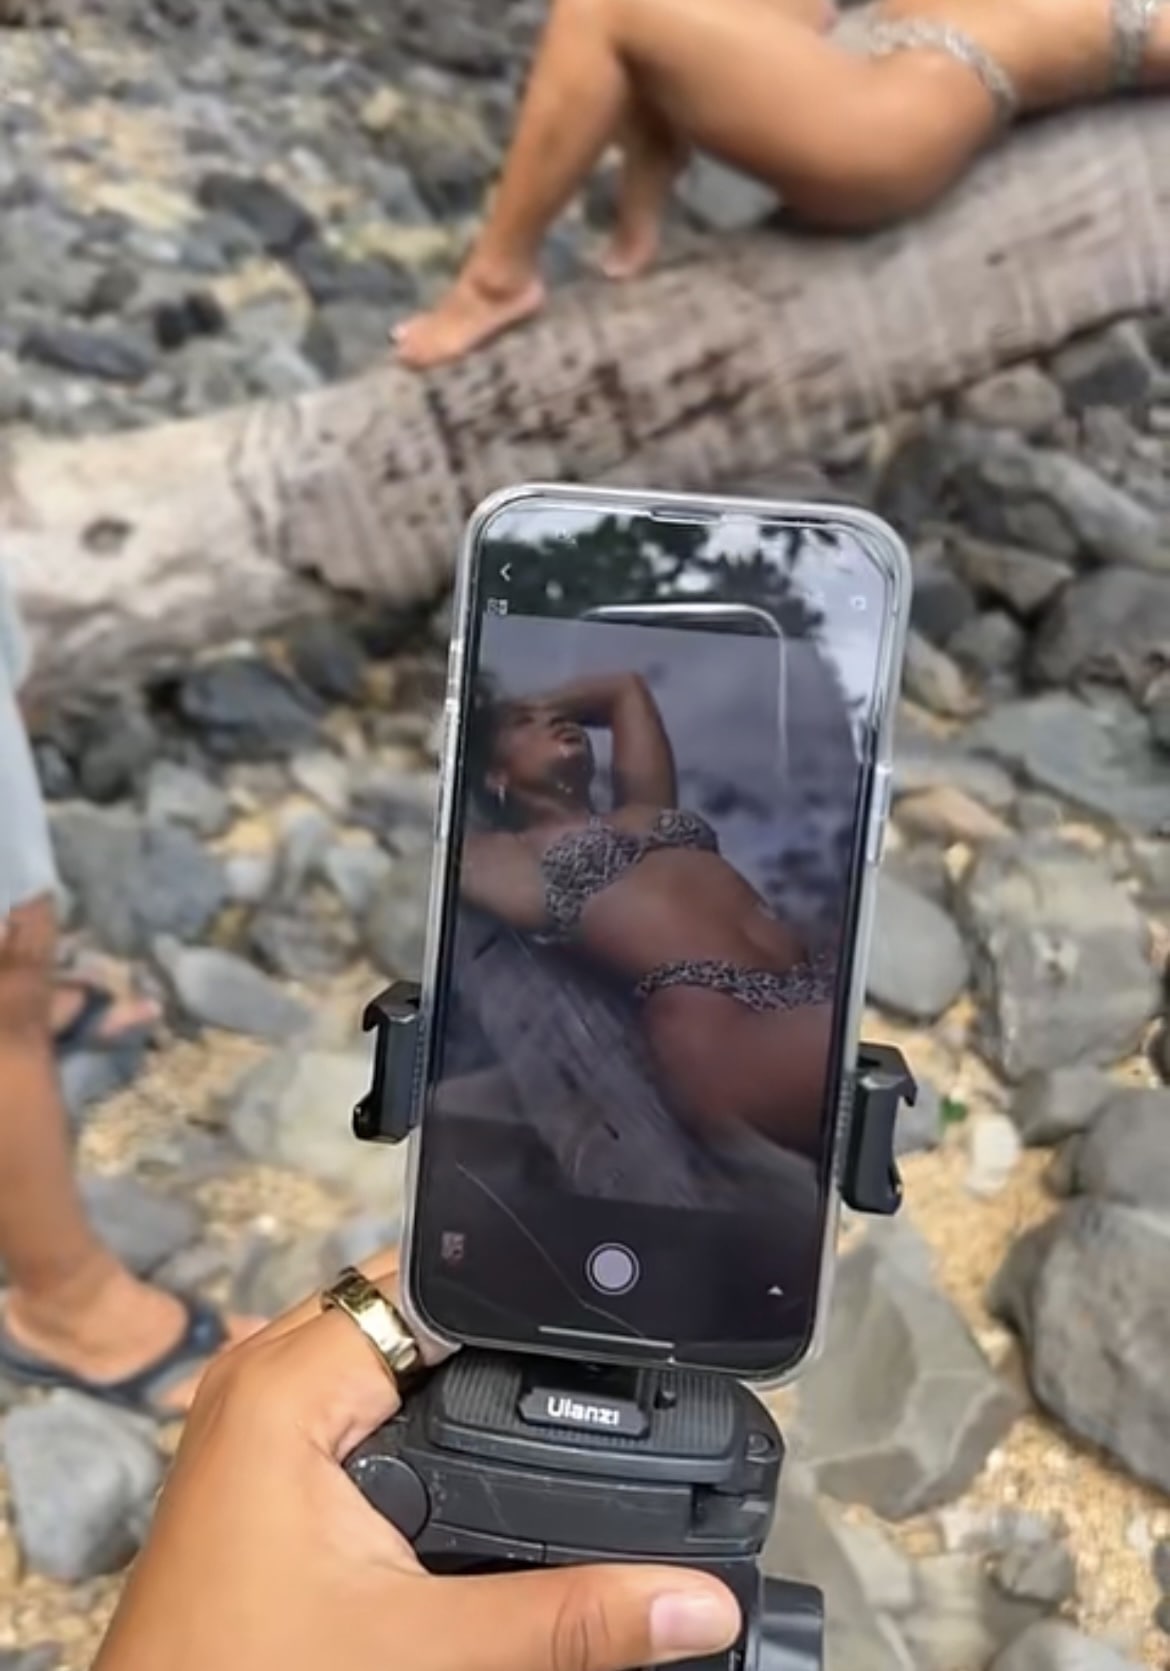 Photo of an iPhone taking a video of a girl in a bikini laying on a log